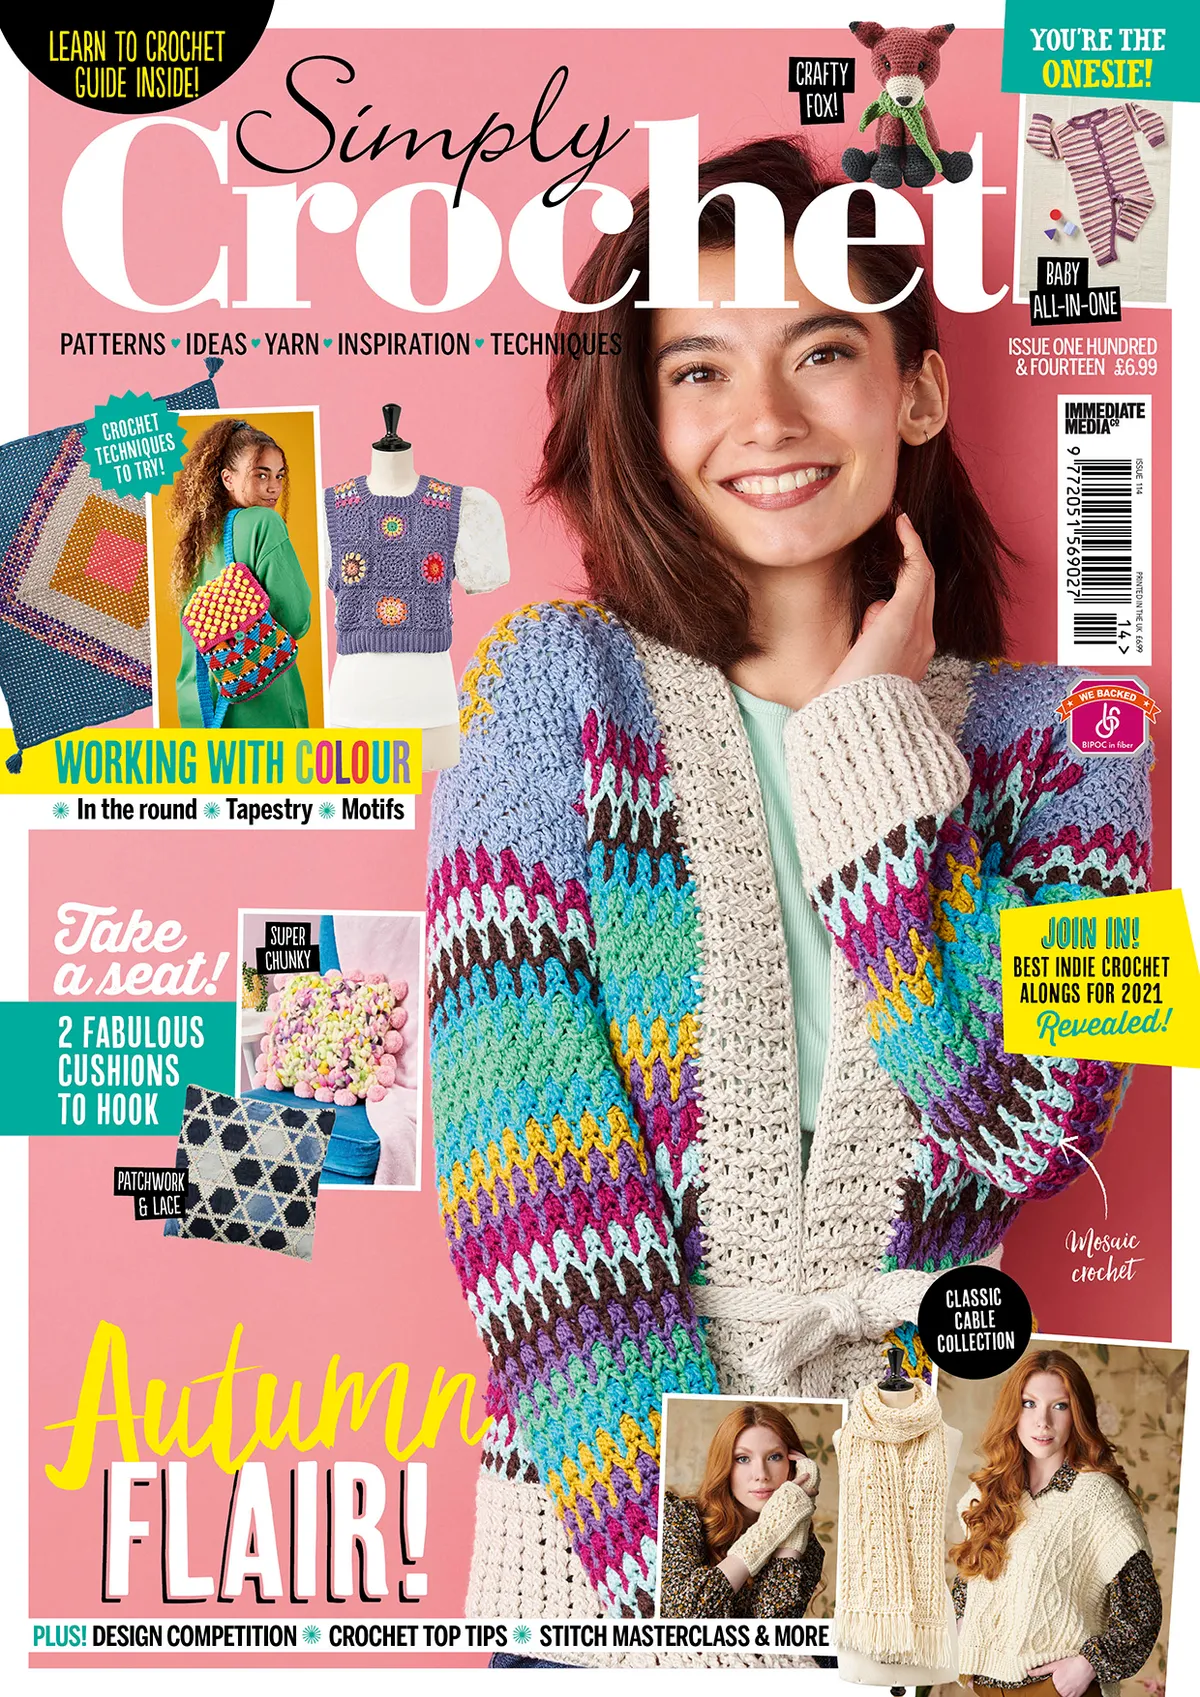 Simply Crochet issue 114 cover